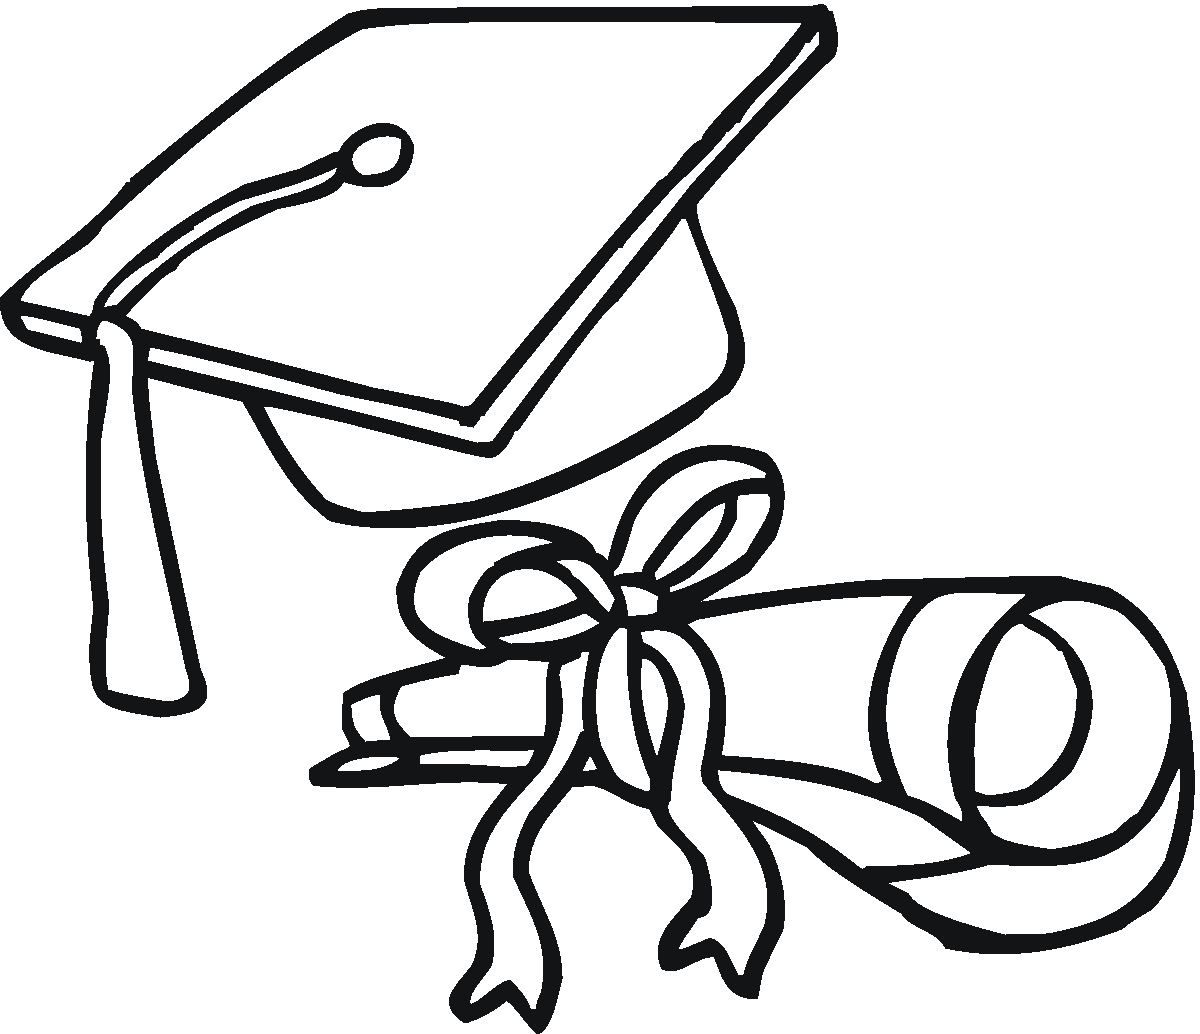 Graduation coloring pages to download and print for free